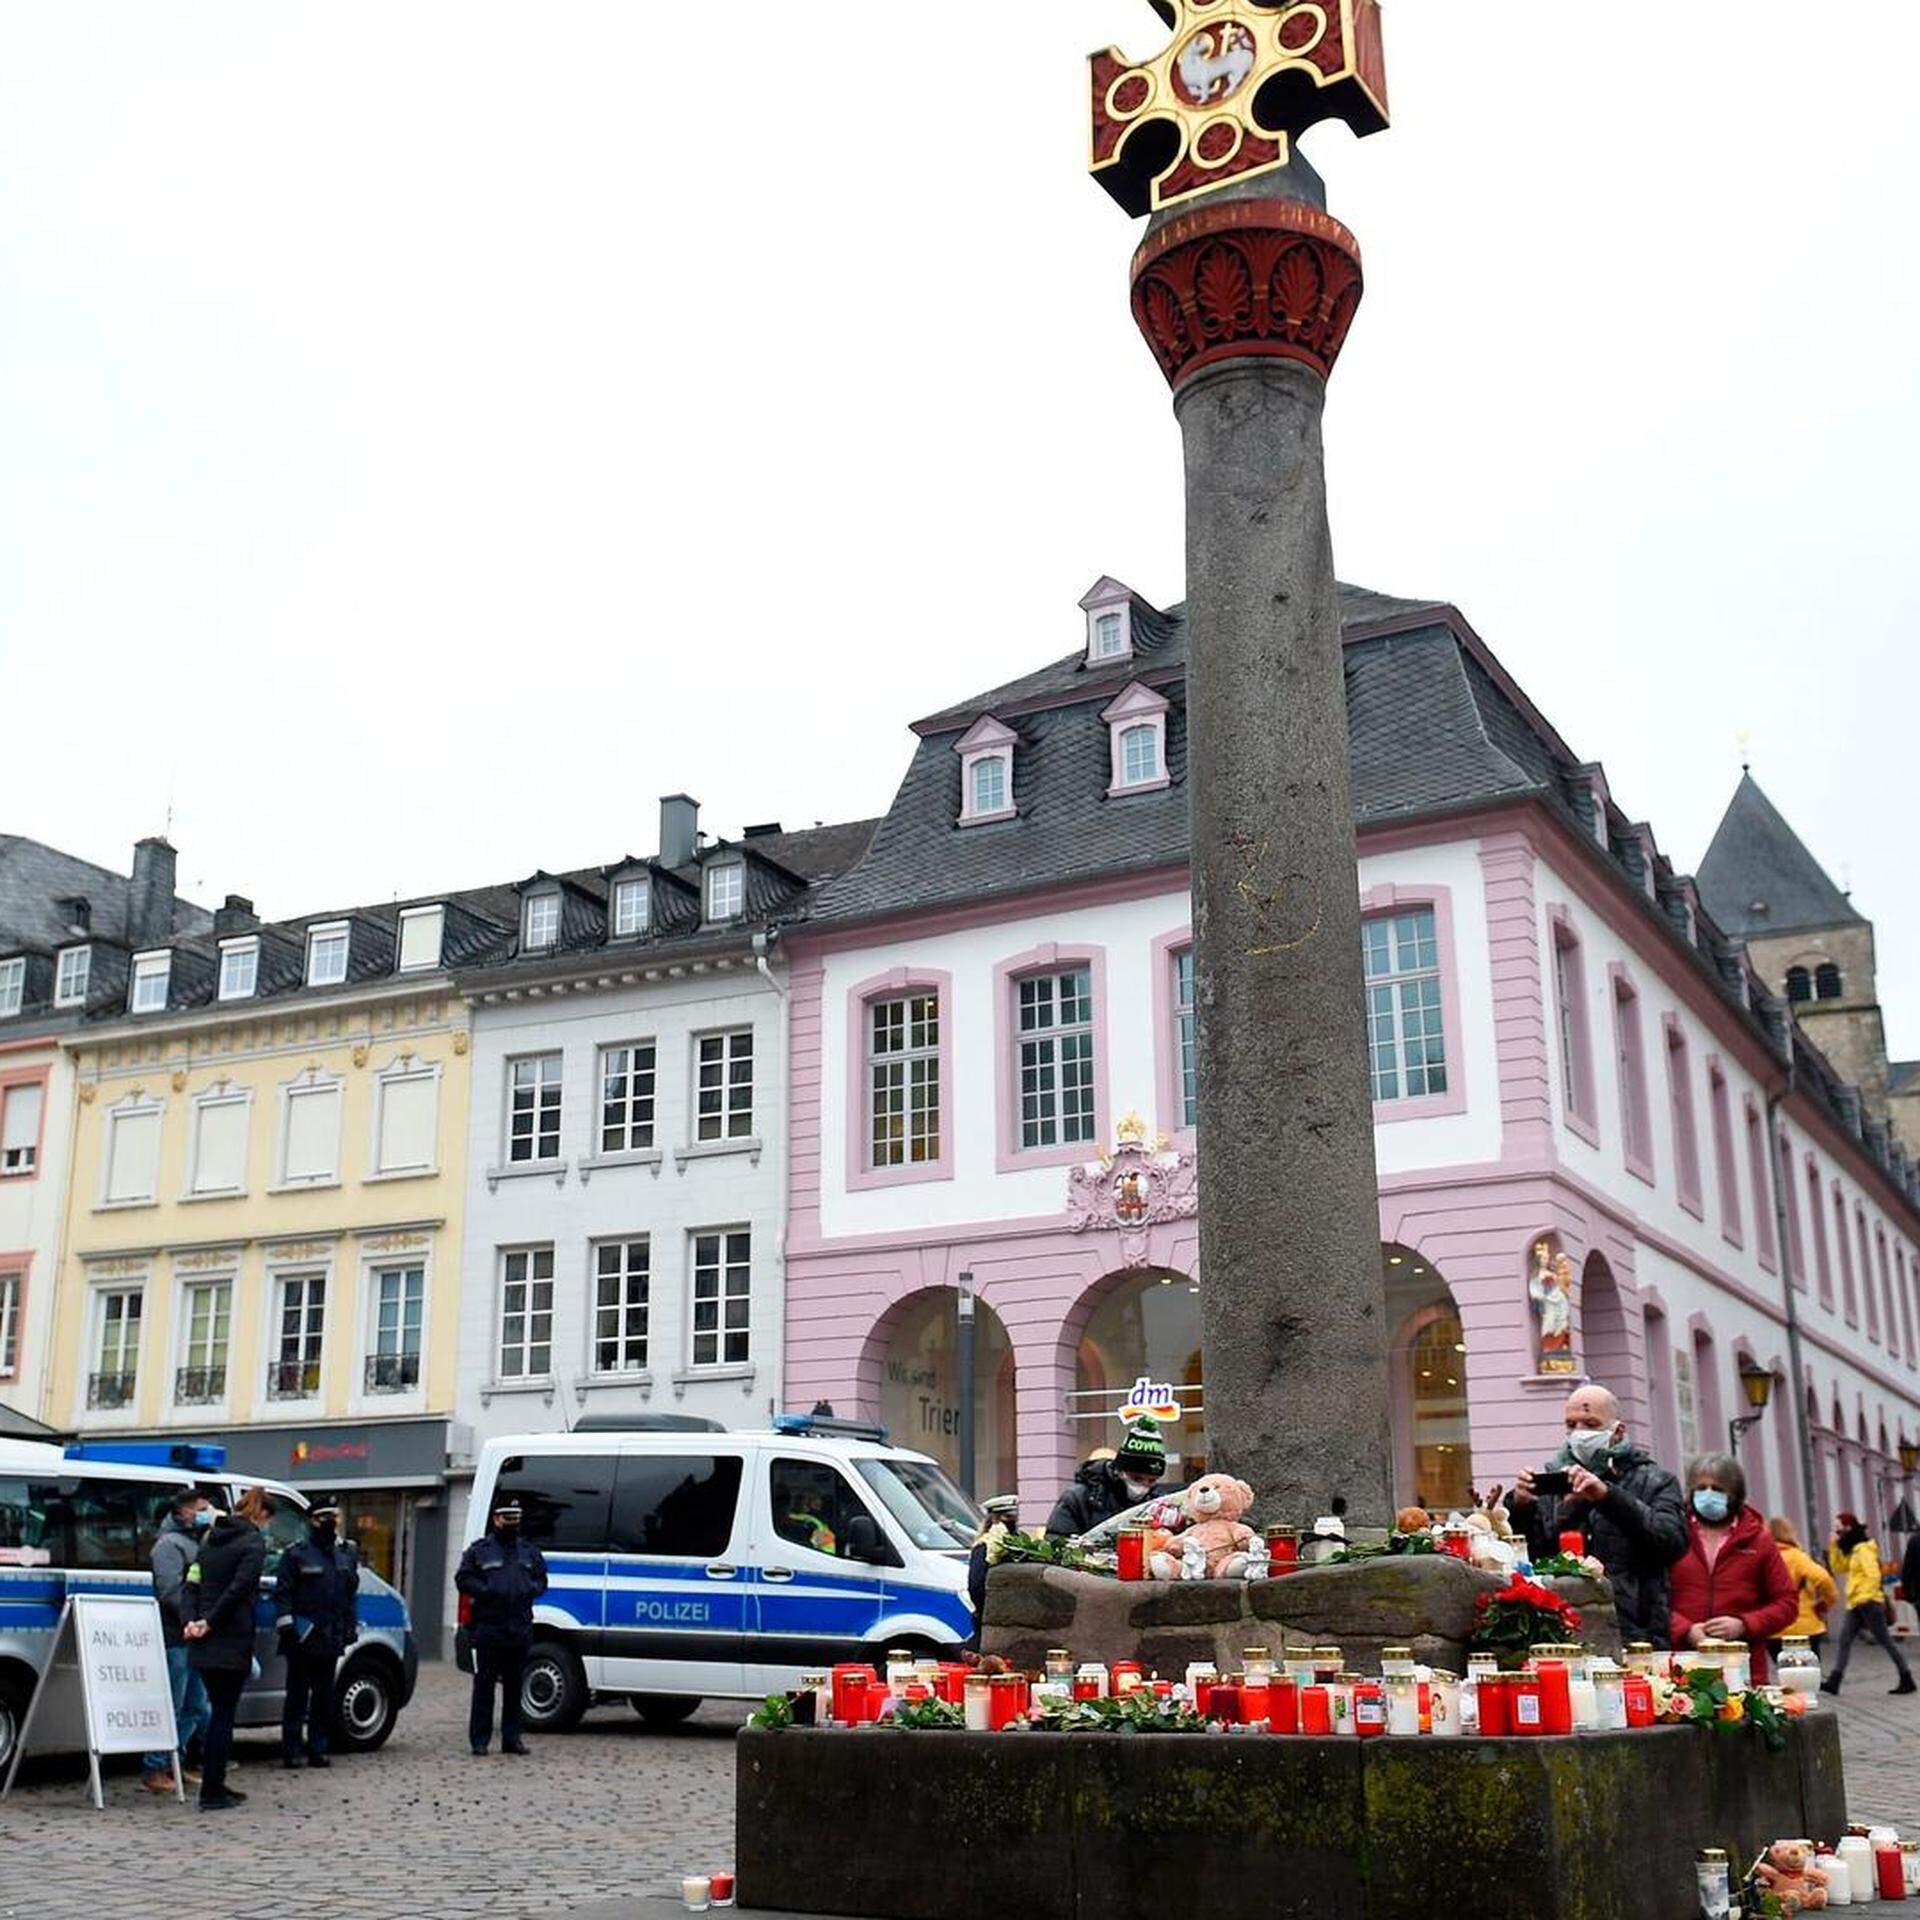 Candles and flowers marked a memorial in Trier’s central pedestrian district for the victims of 2020 car assault 